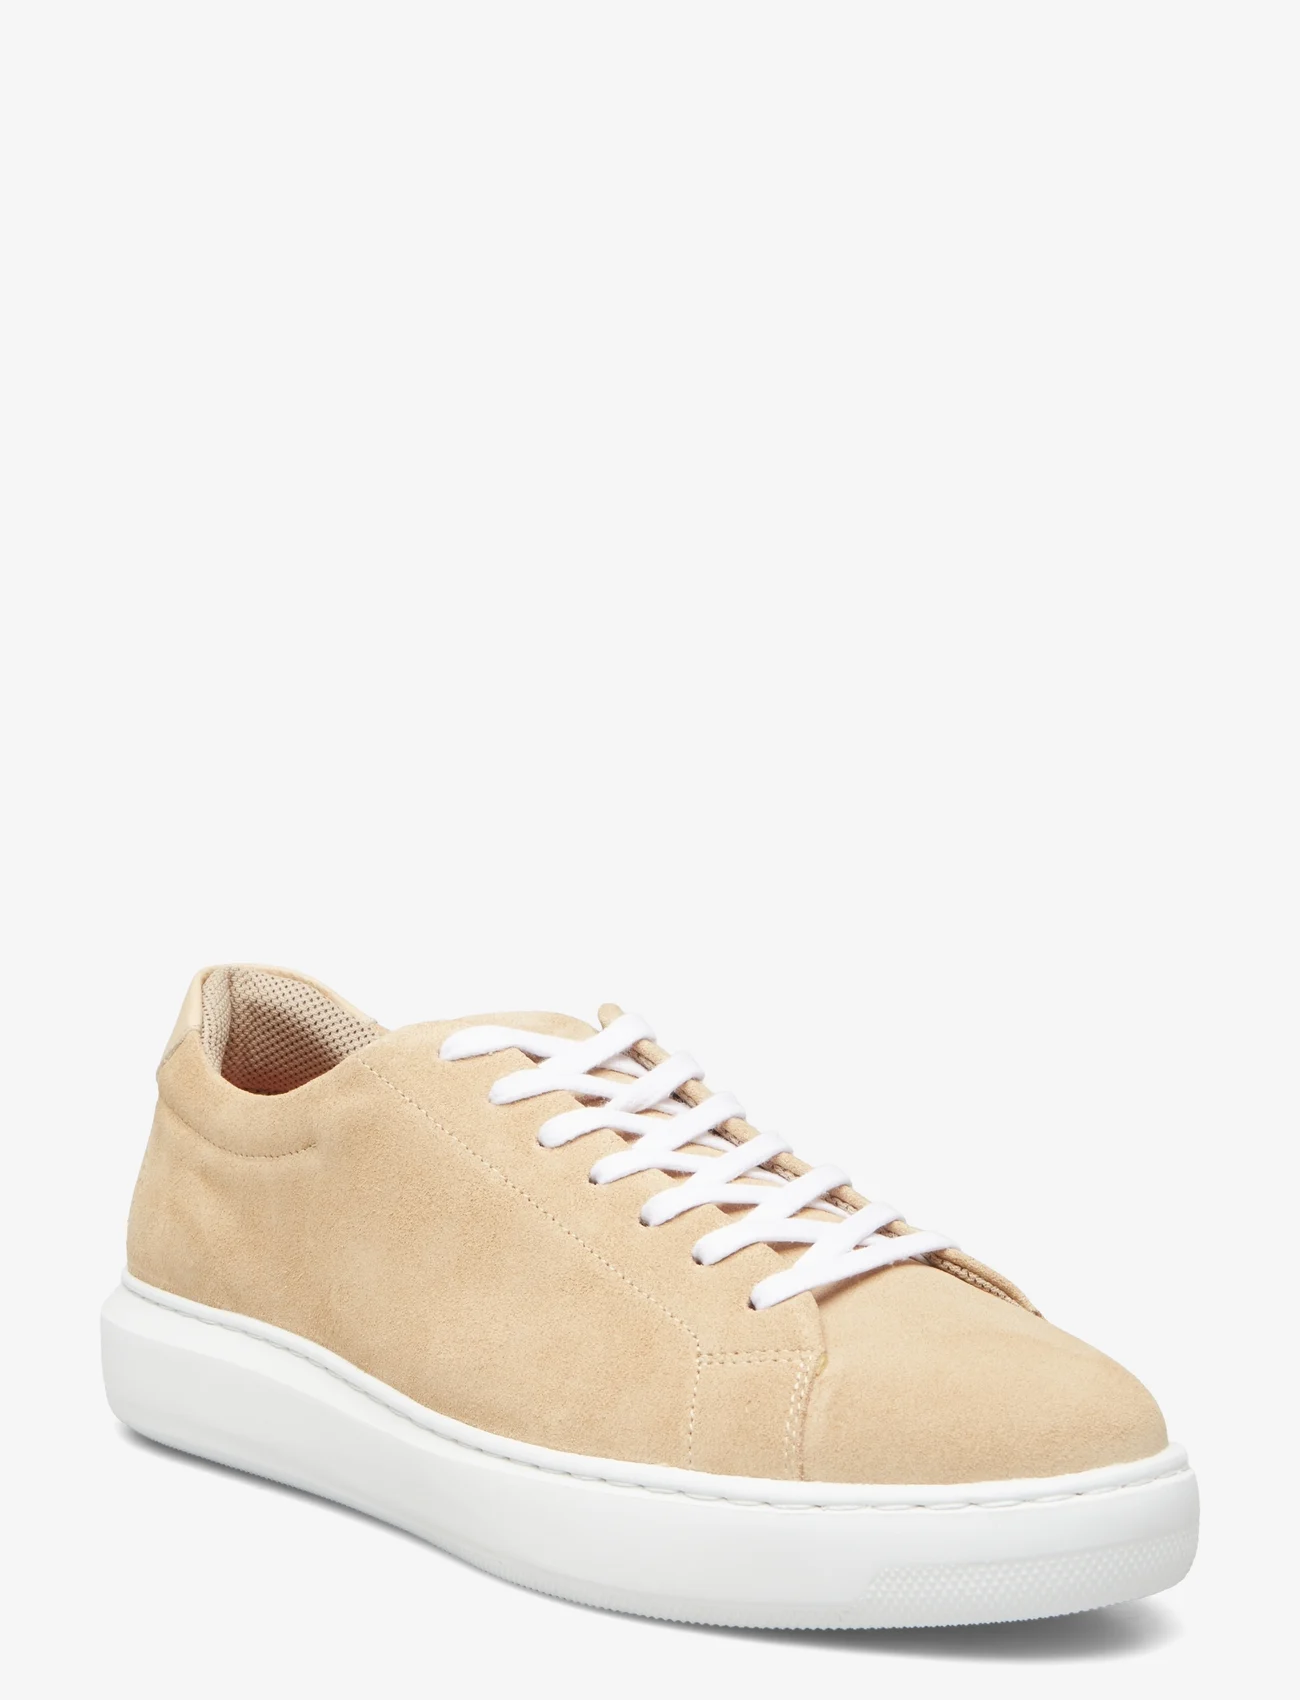 Bianco - BIAGARY Sneaker Suede - low tops - sand - 0